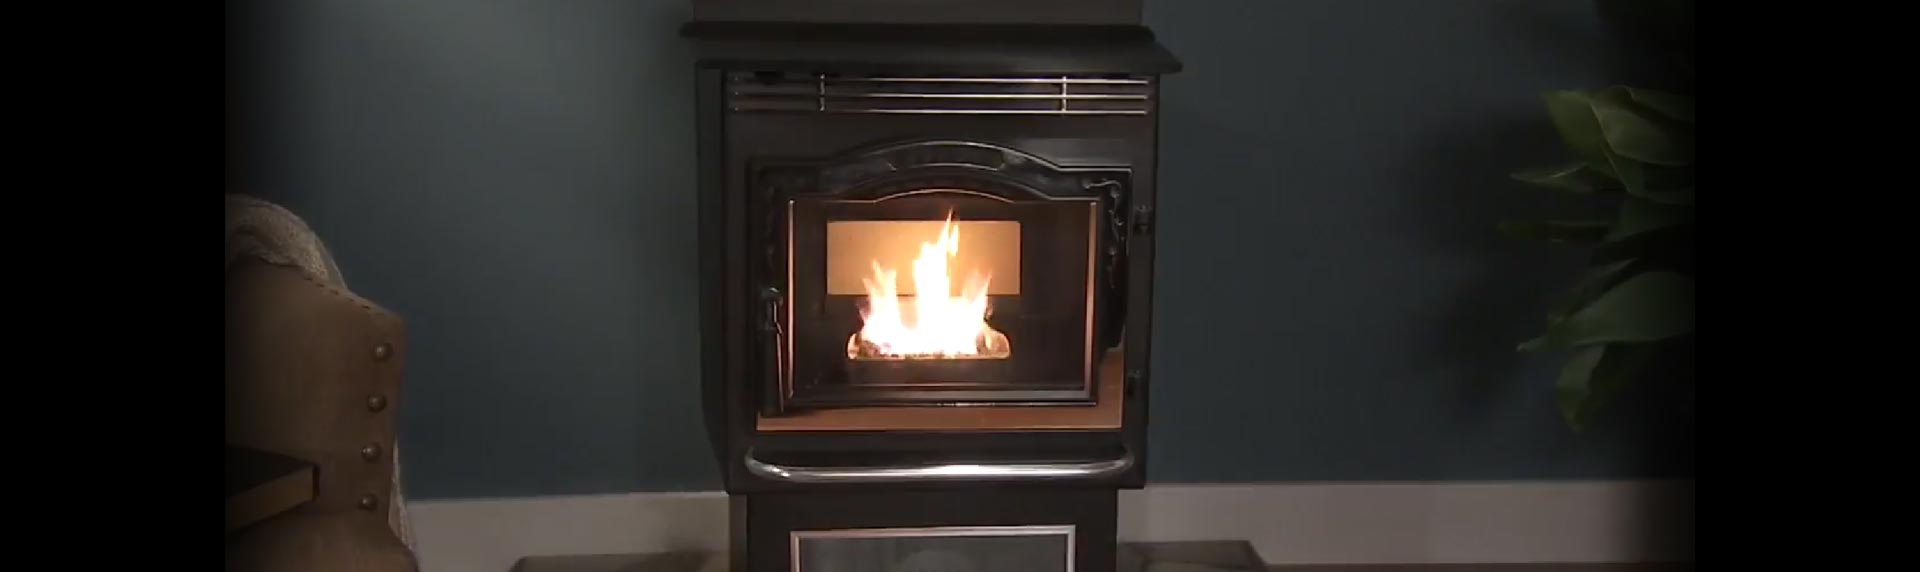 Traditional Pellet Stove